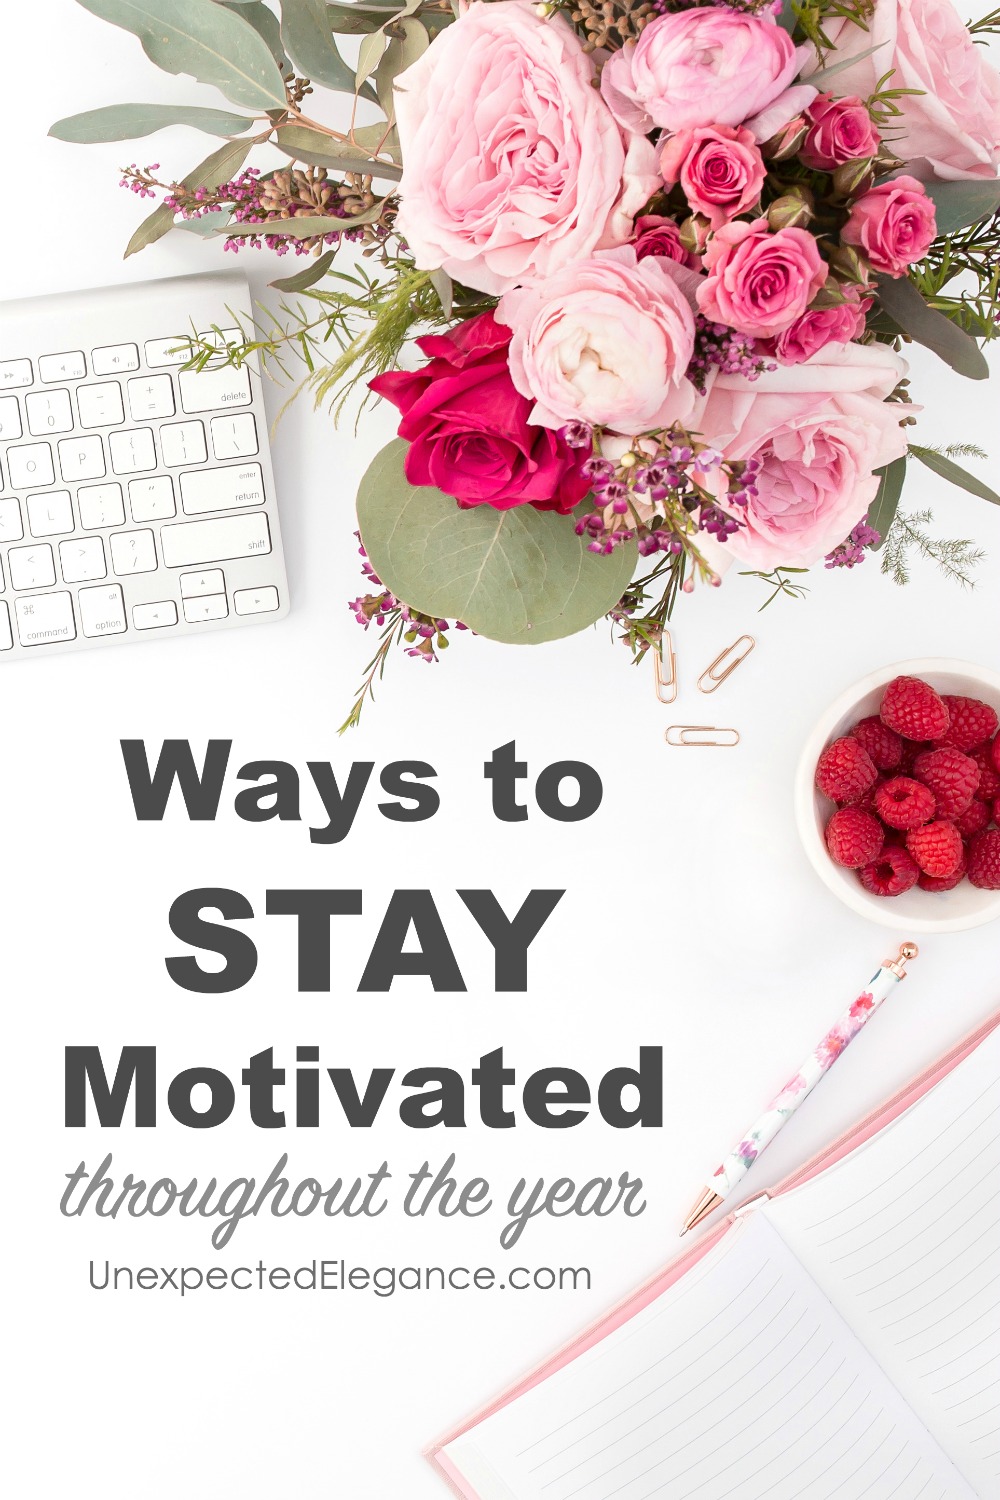 Do you struggle to stay motivated and accomplish your goals?  There are a few things you can do to keep yourself on track this year...it's never too late to start over!